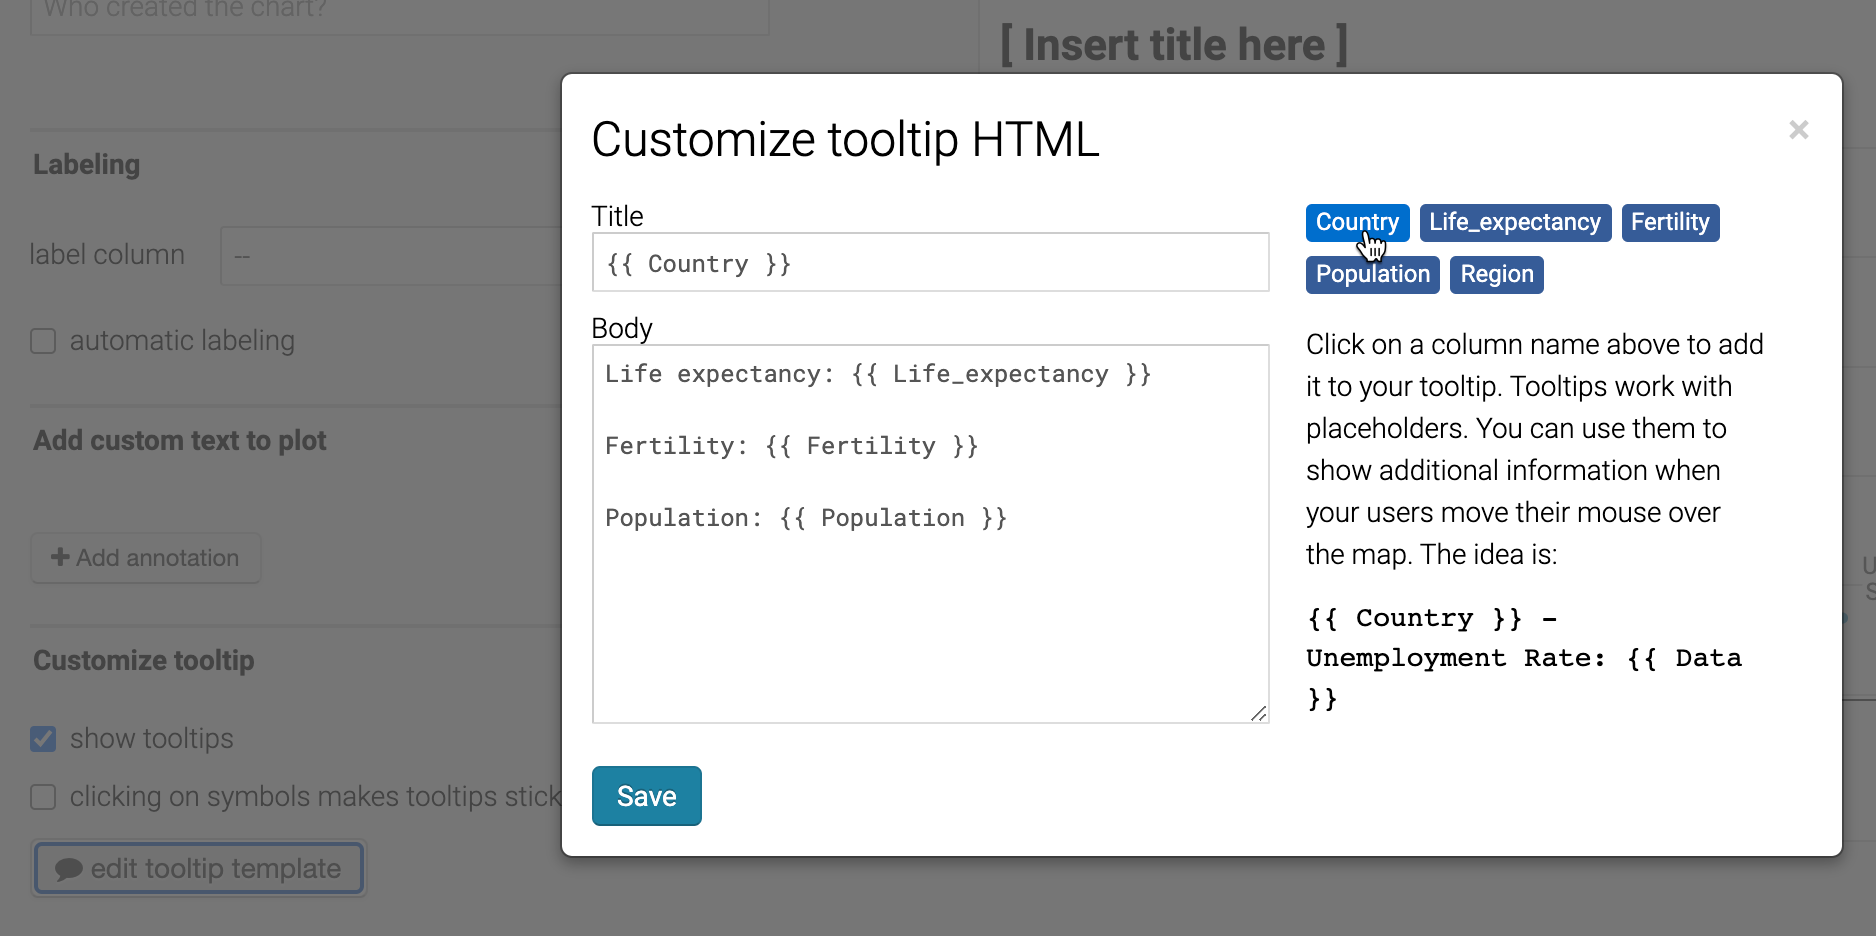 In the tooltip editor window, type and click column headers to customize the display.